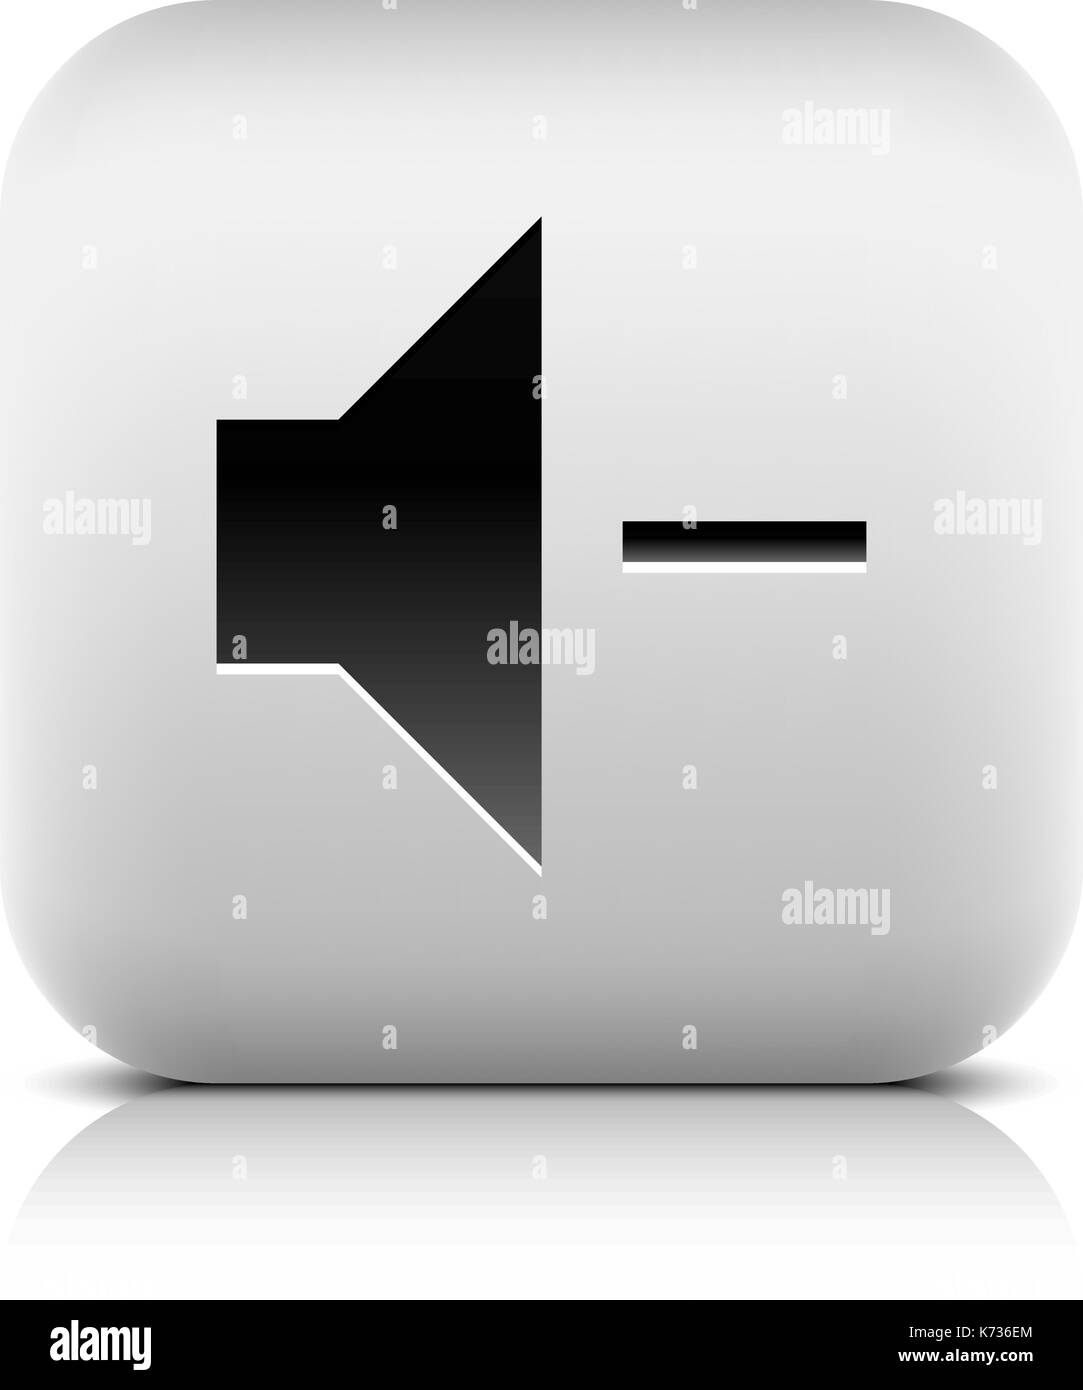 Media player icon with volume decrease sign. Rounded square web button with black shadow gray reflection on white background. Series in a stone style. Stock Vector